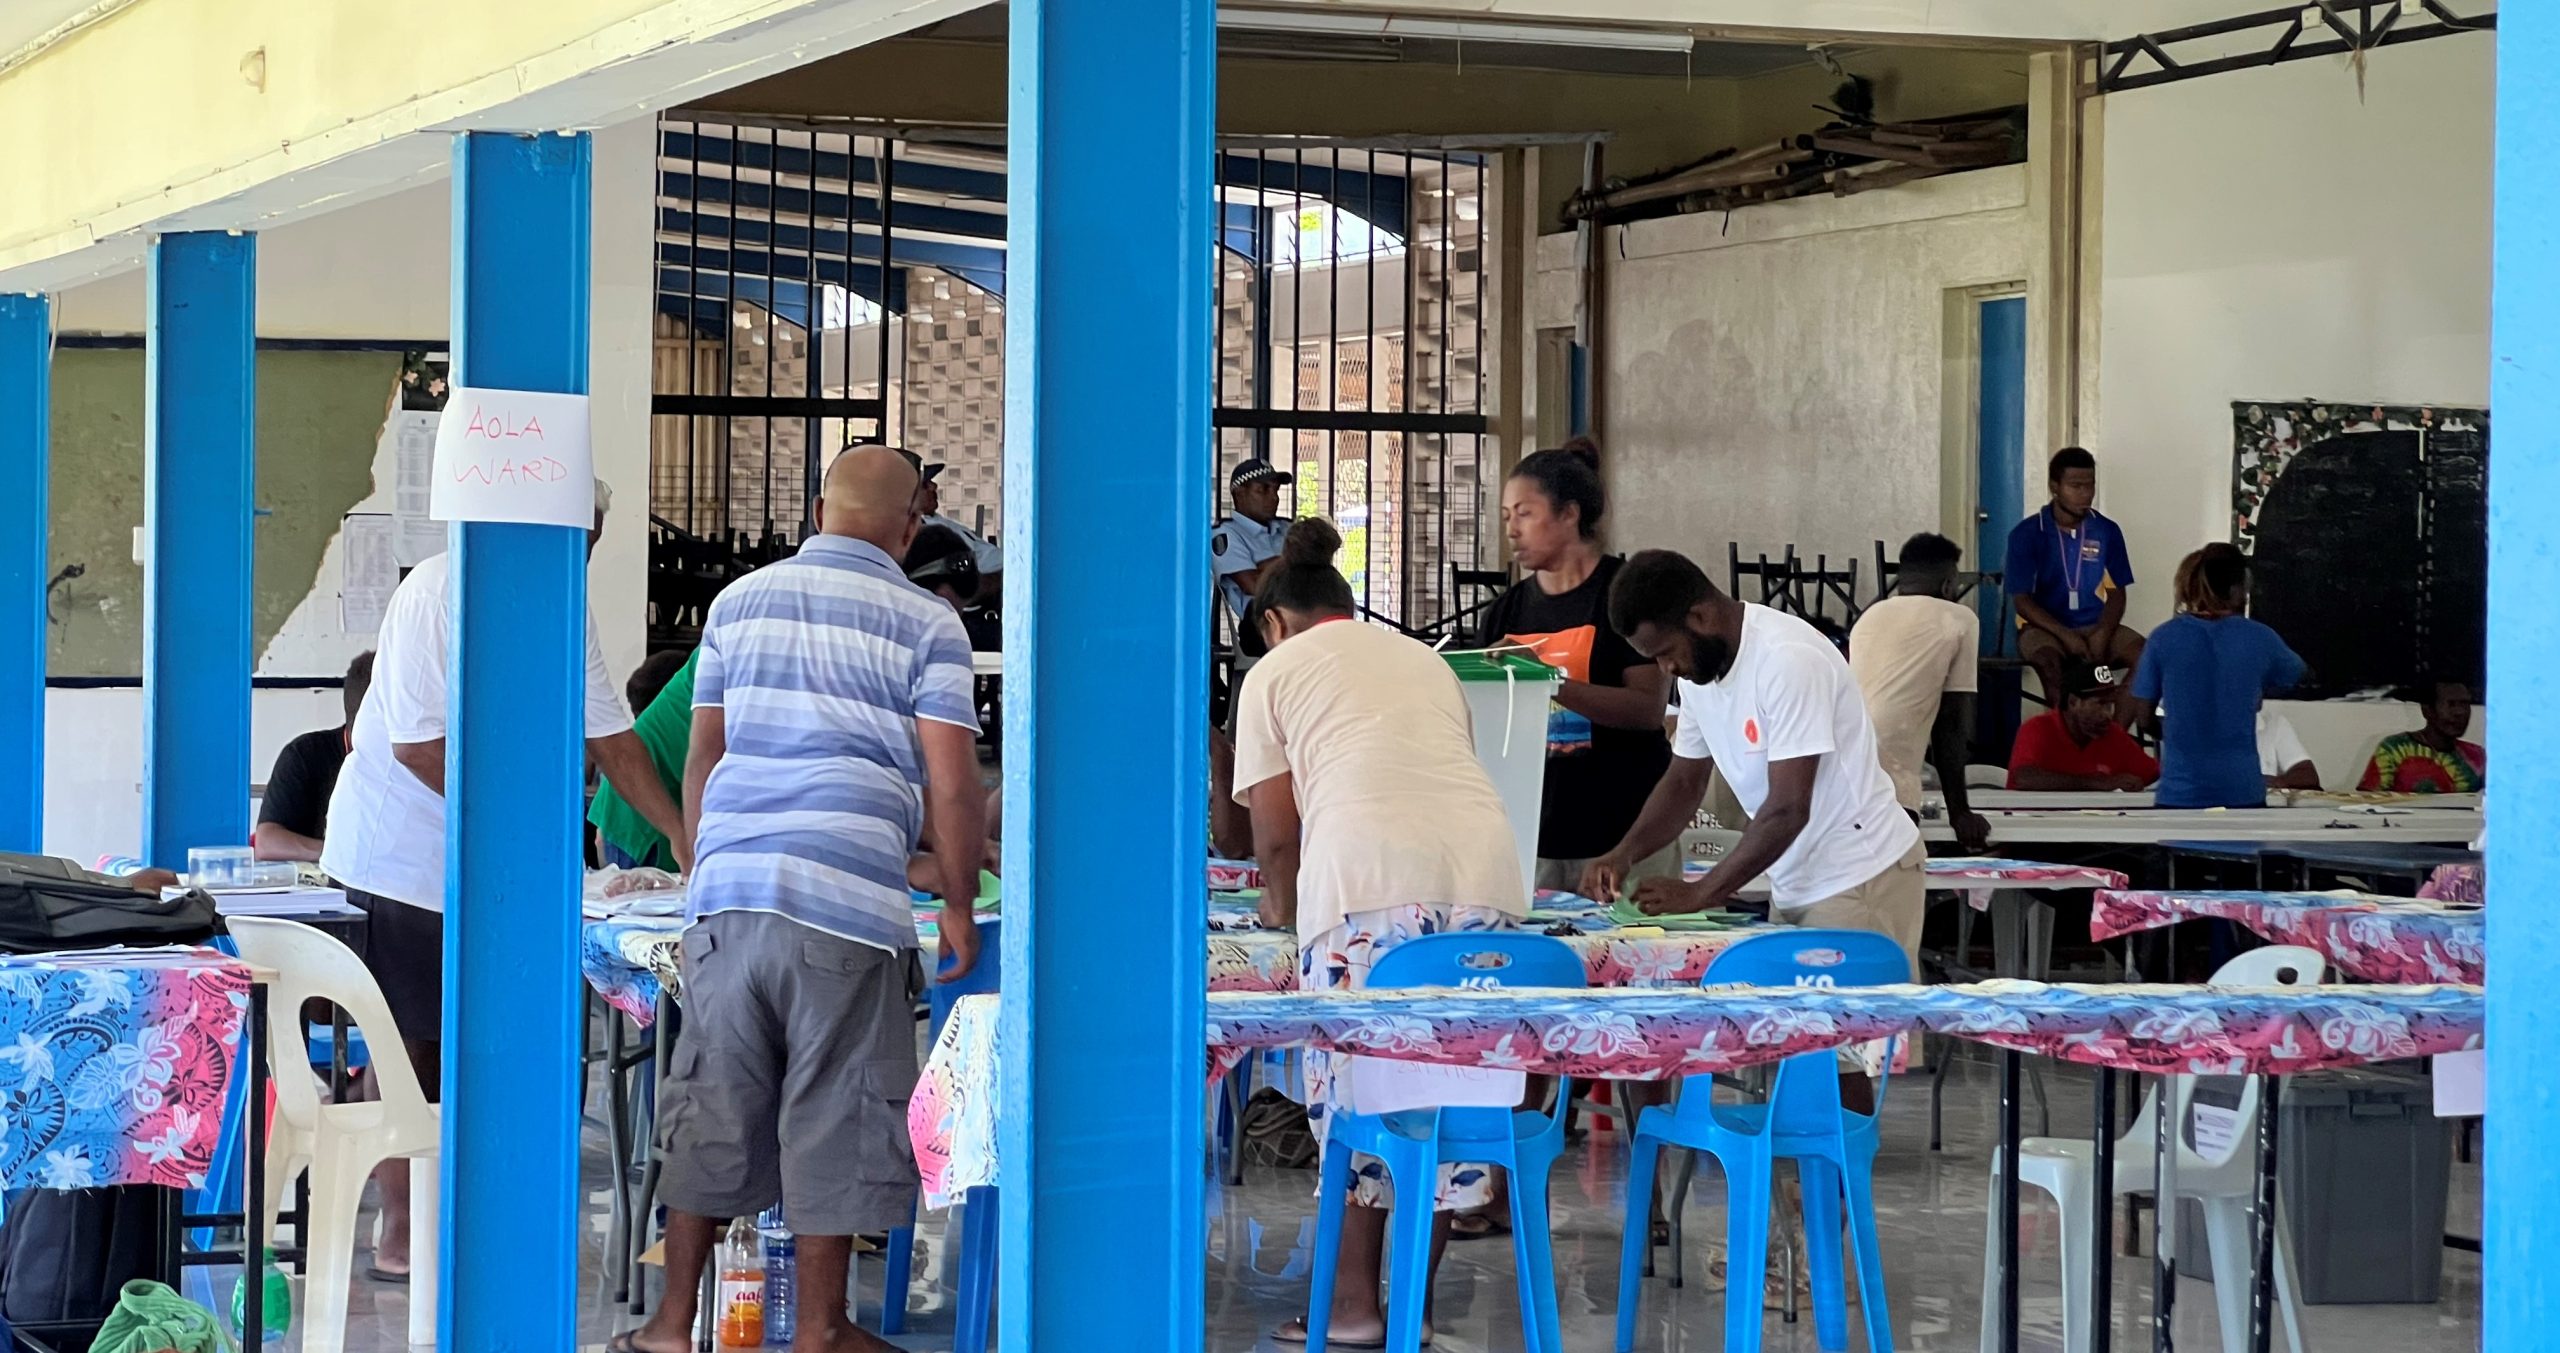 Solomon Islands Election Update: Voter Turnout Reaches 50%, Over 80% of Seats Declared